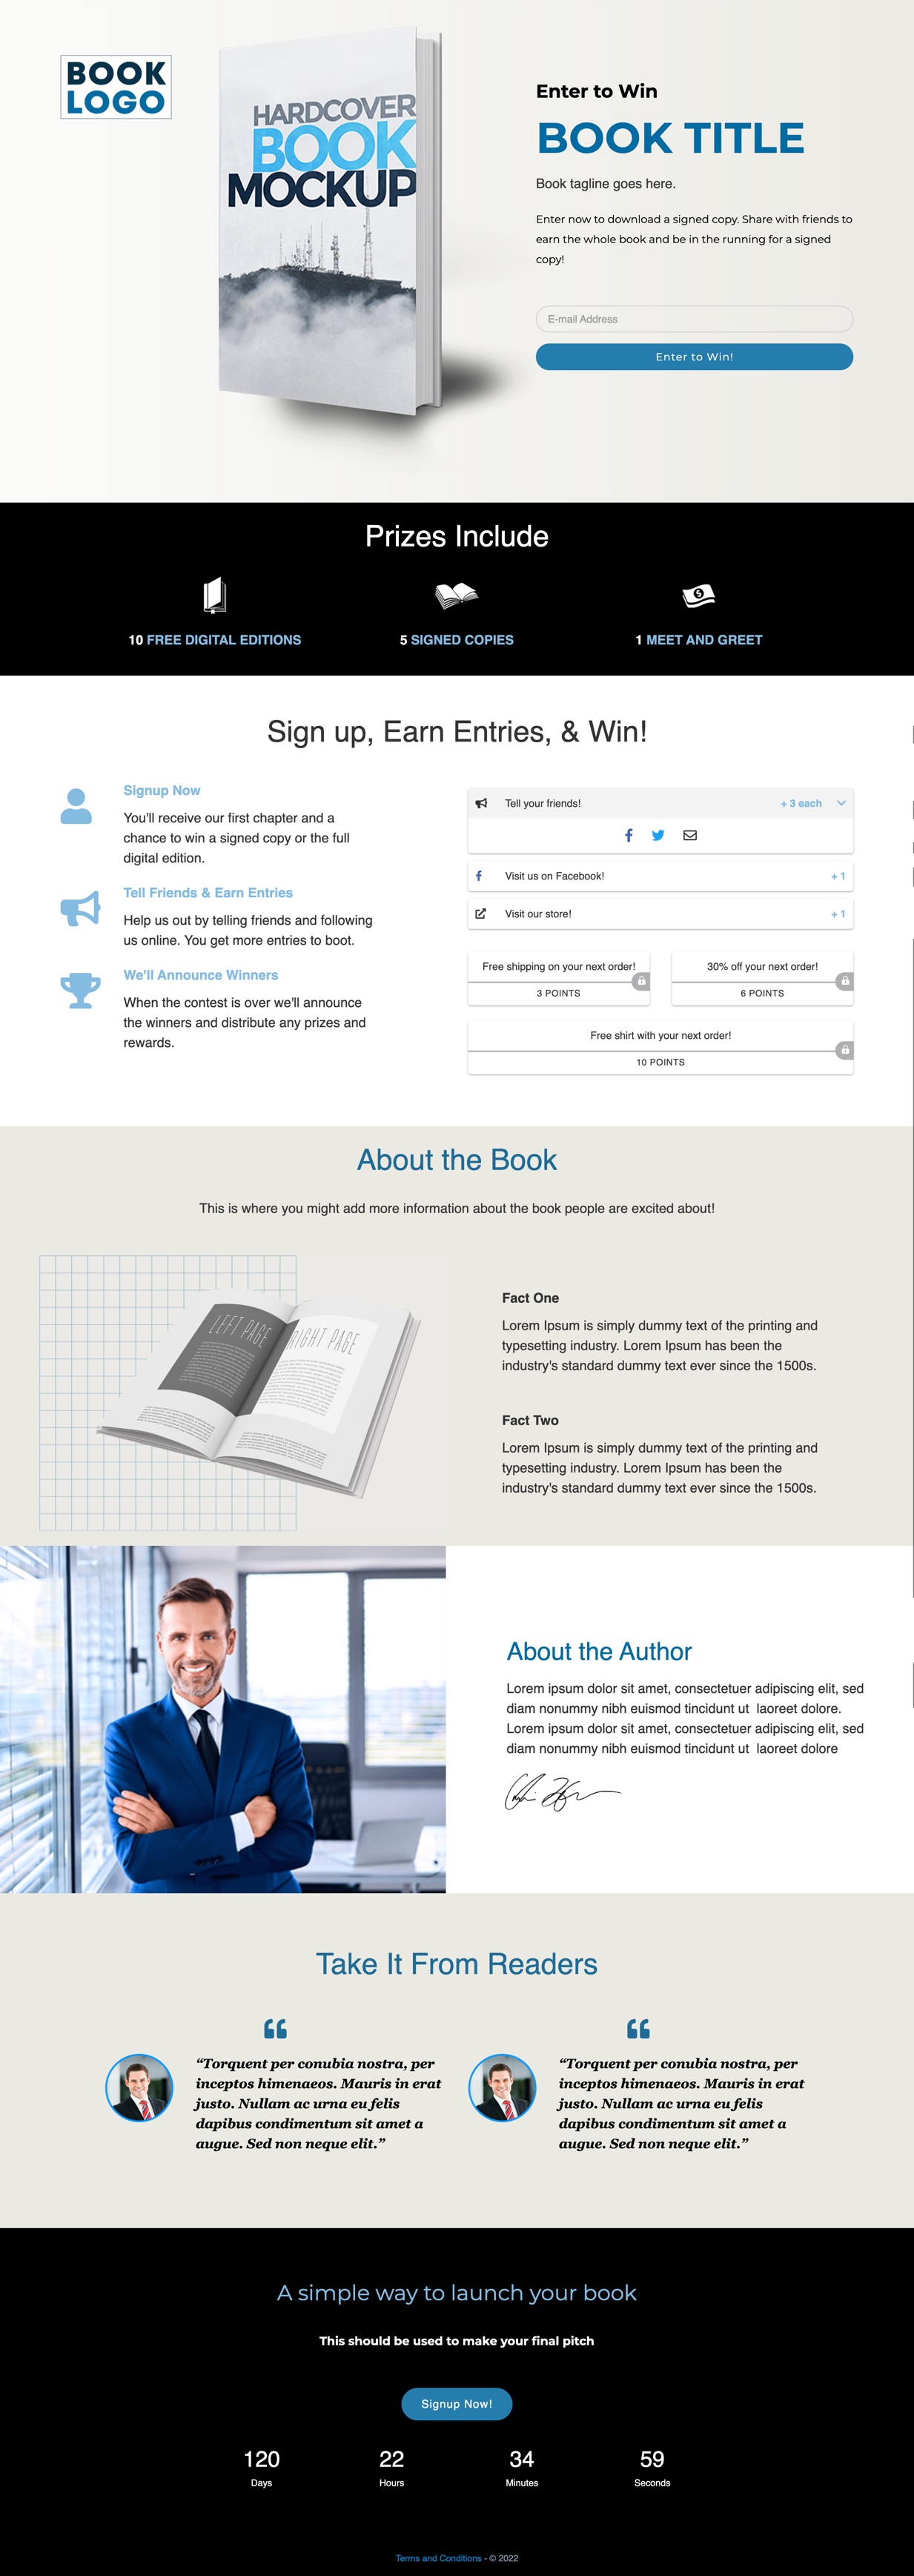 Landing Page Template:  Book Launch Contest - Contest